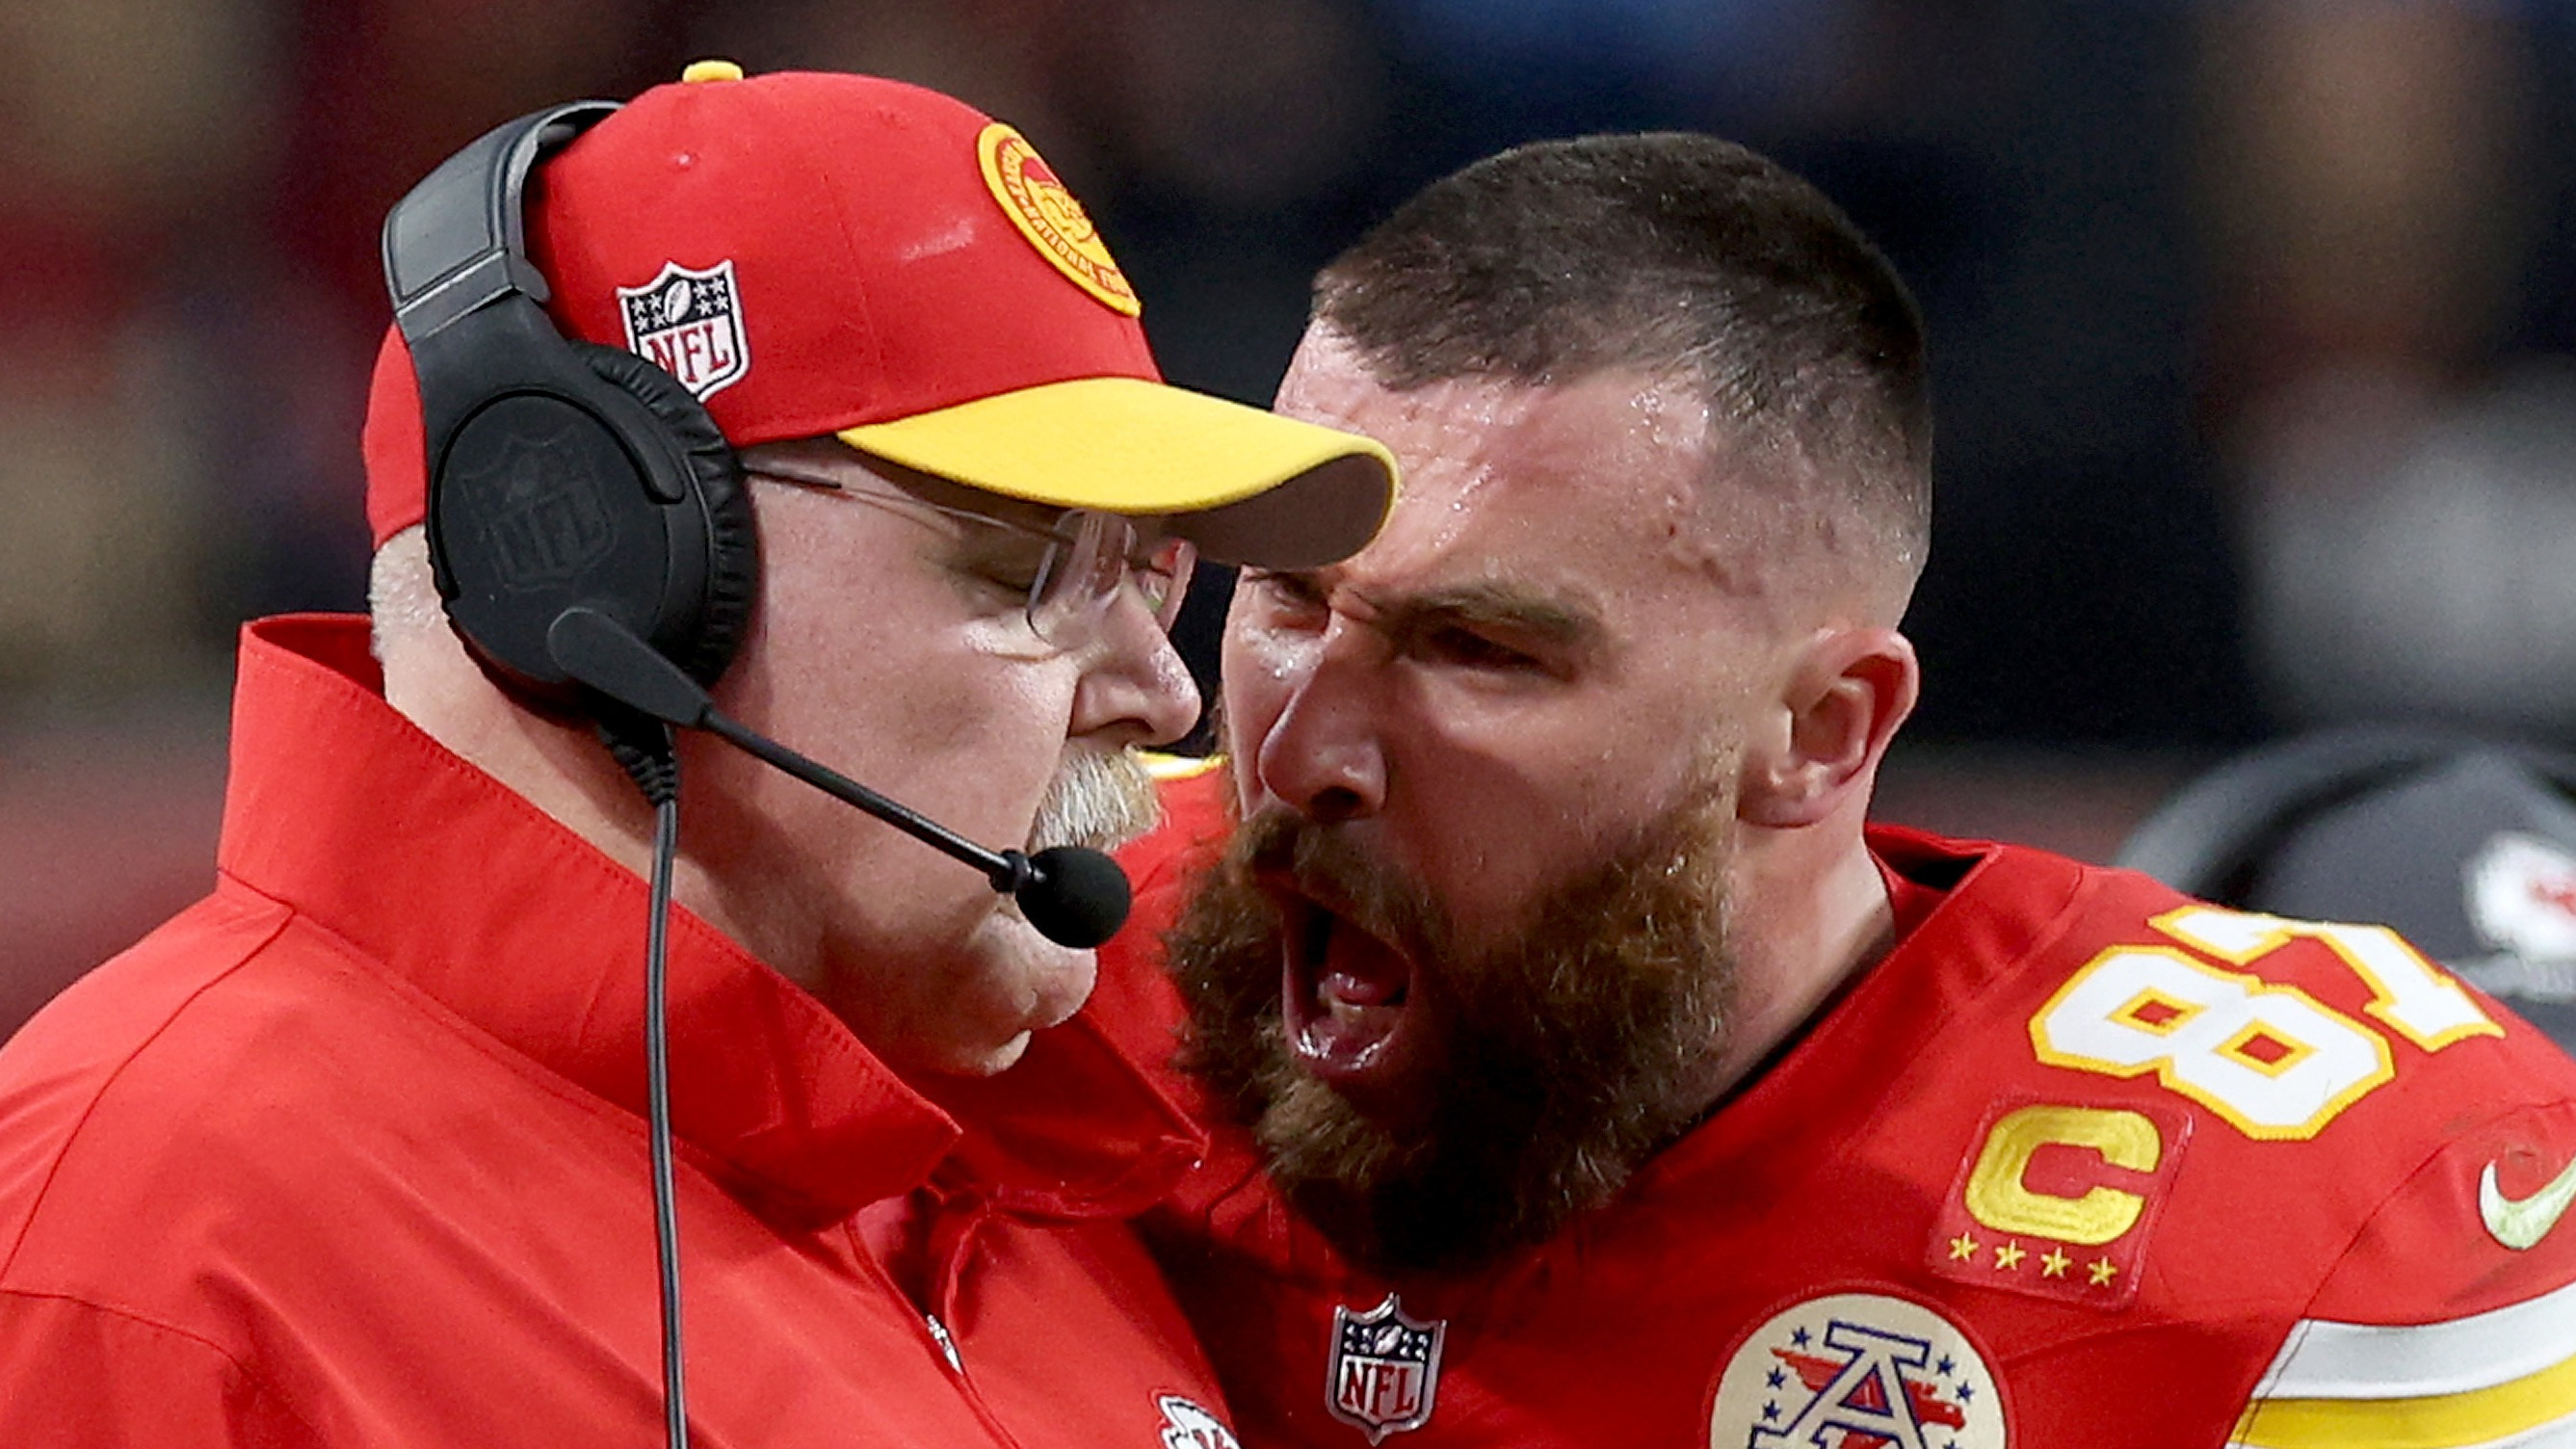 Super Bowl: furious, star Travis Kelce shoves his coach while yelling at him